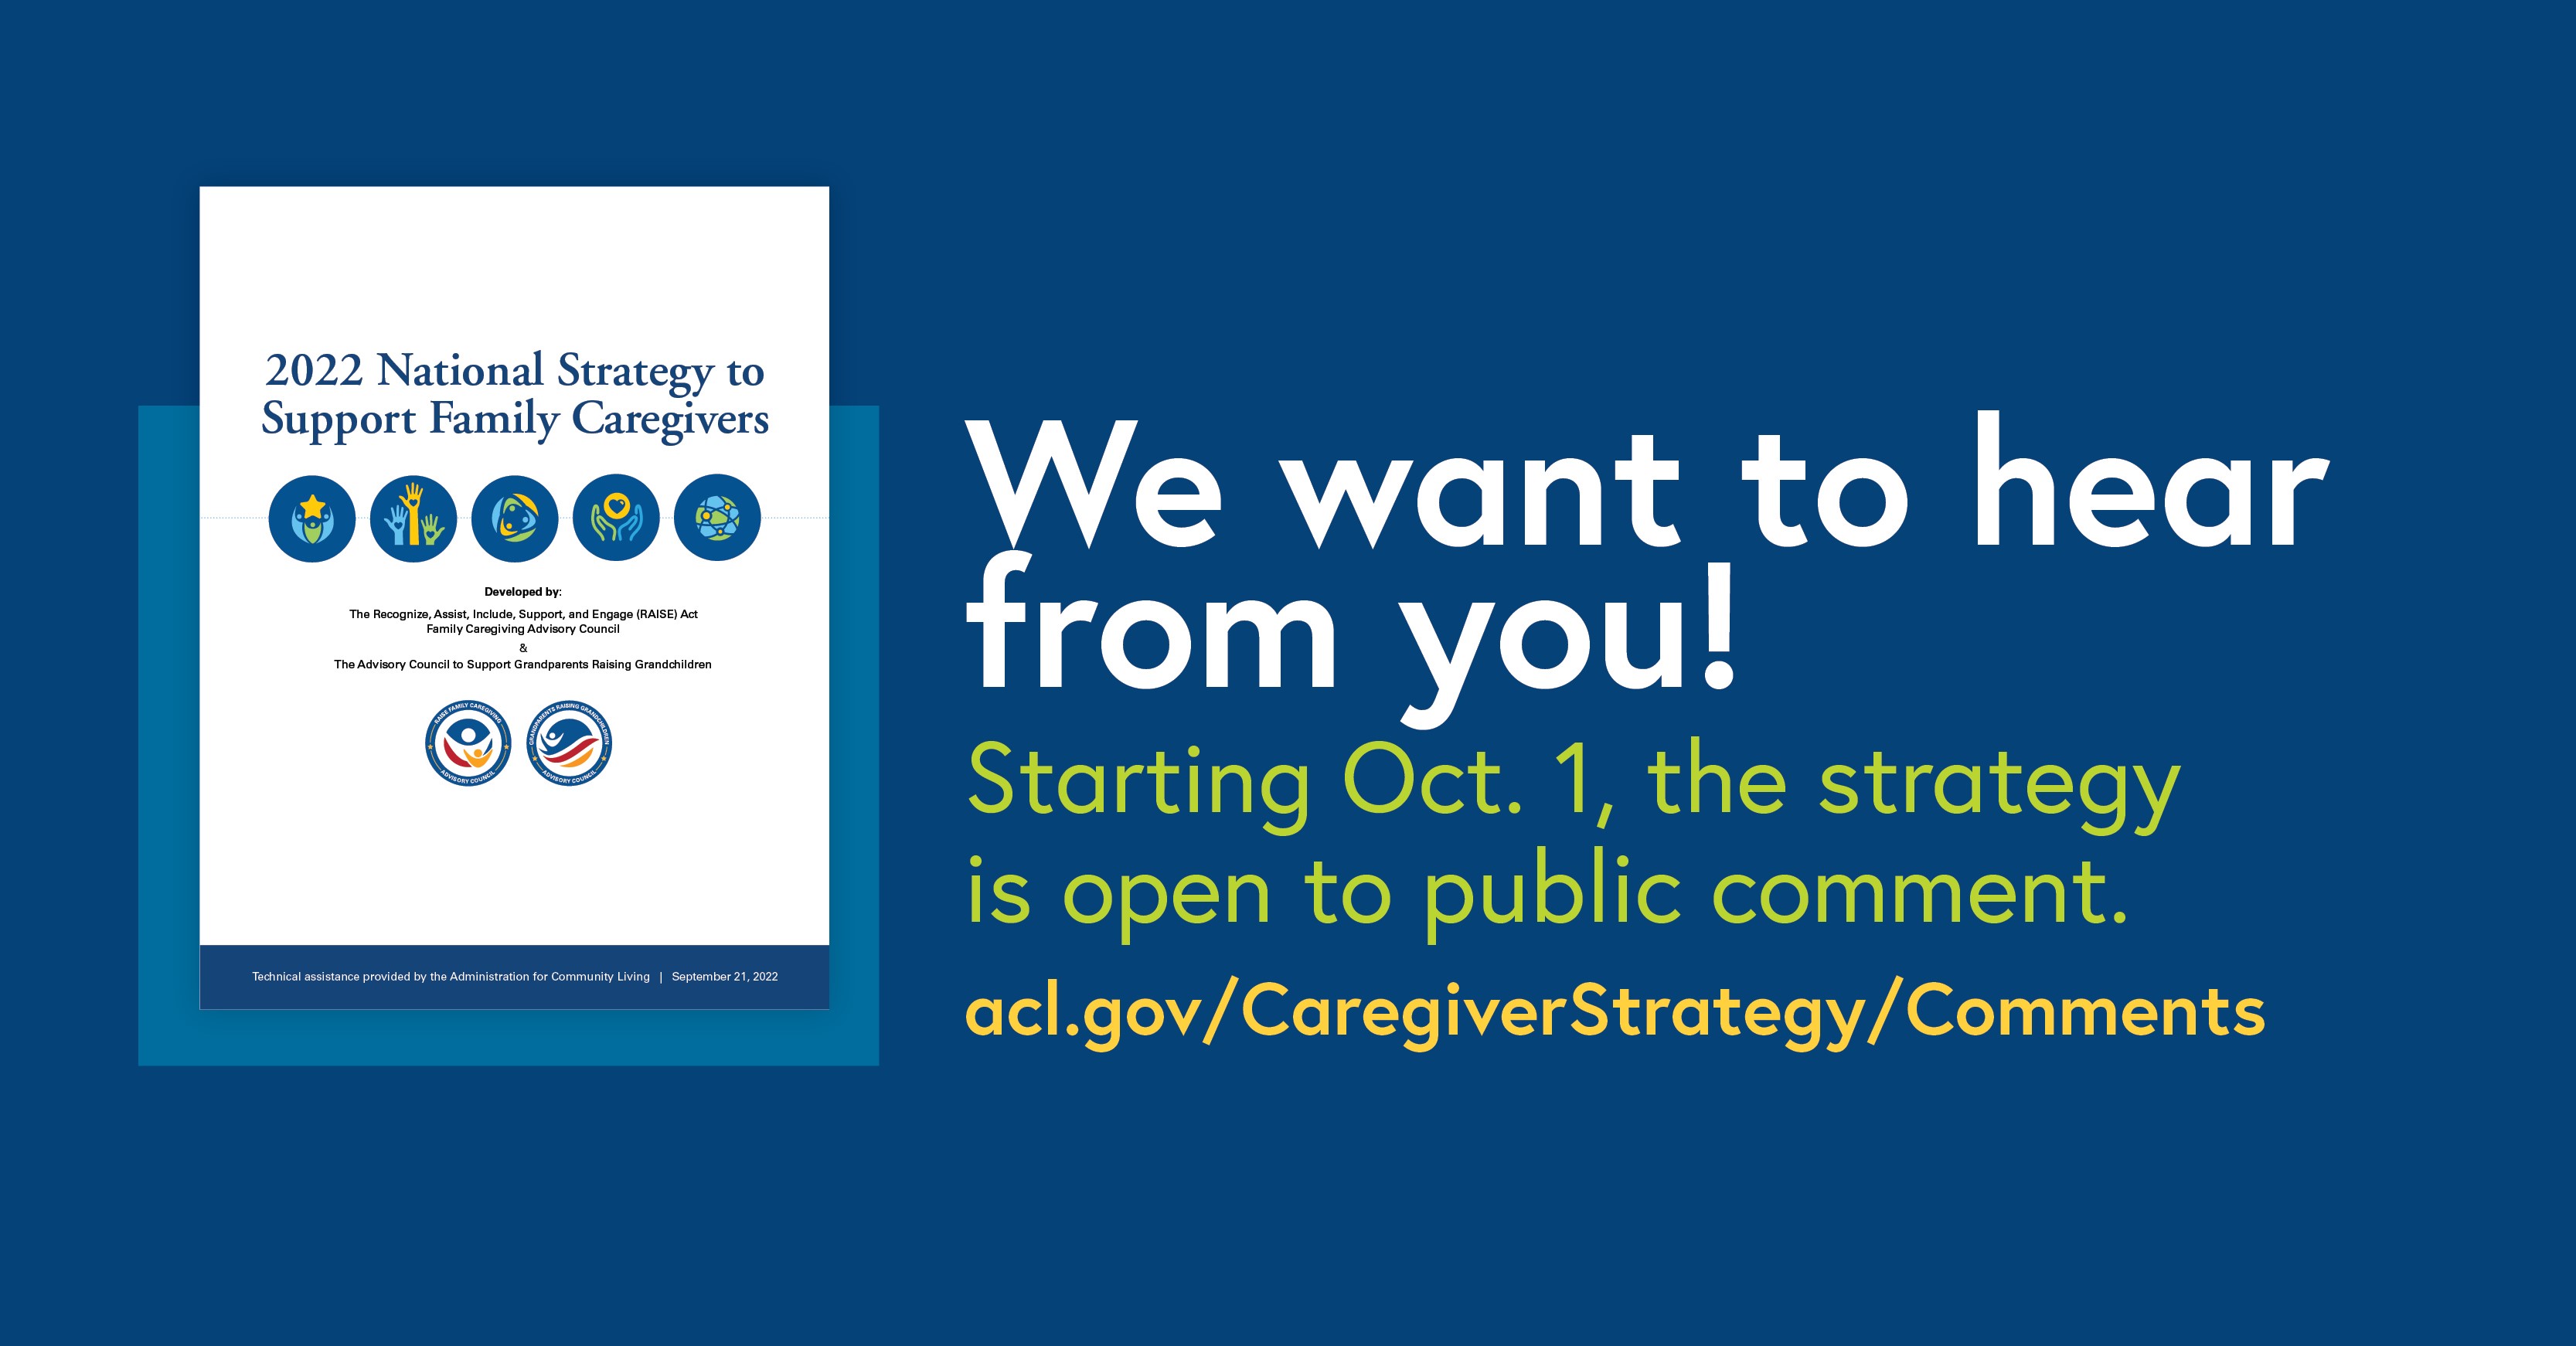 We want to hear from you! Starting October 1, the strategy is open to public comment. acl.gov/CaregiverStrategy/Comments